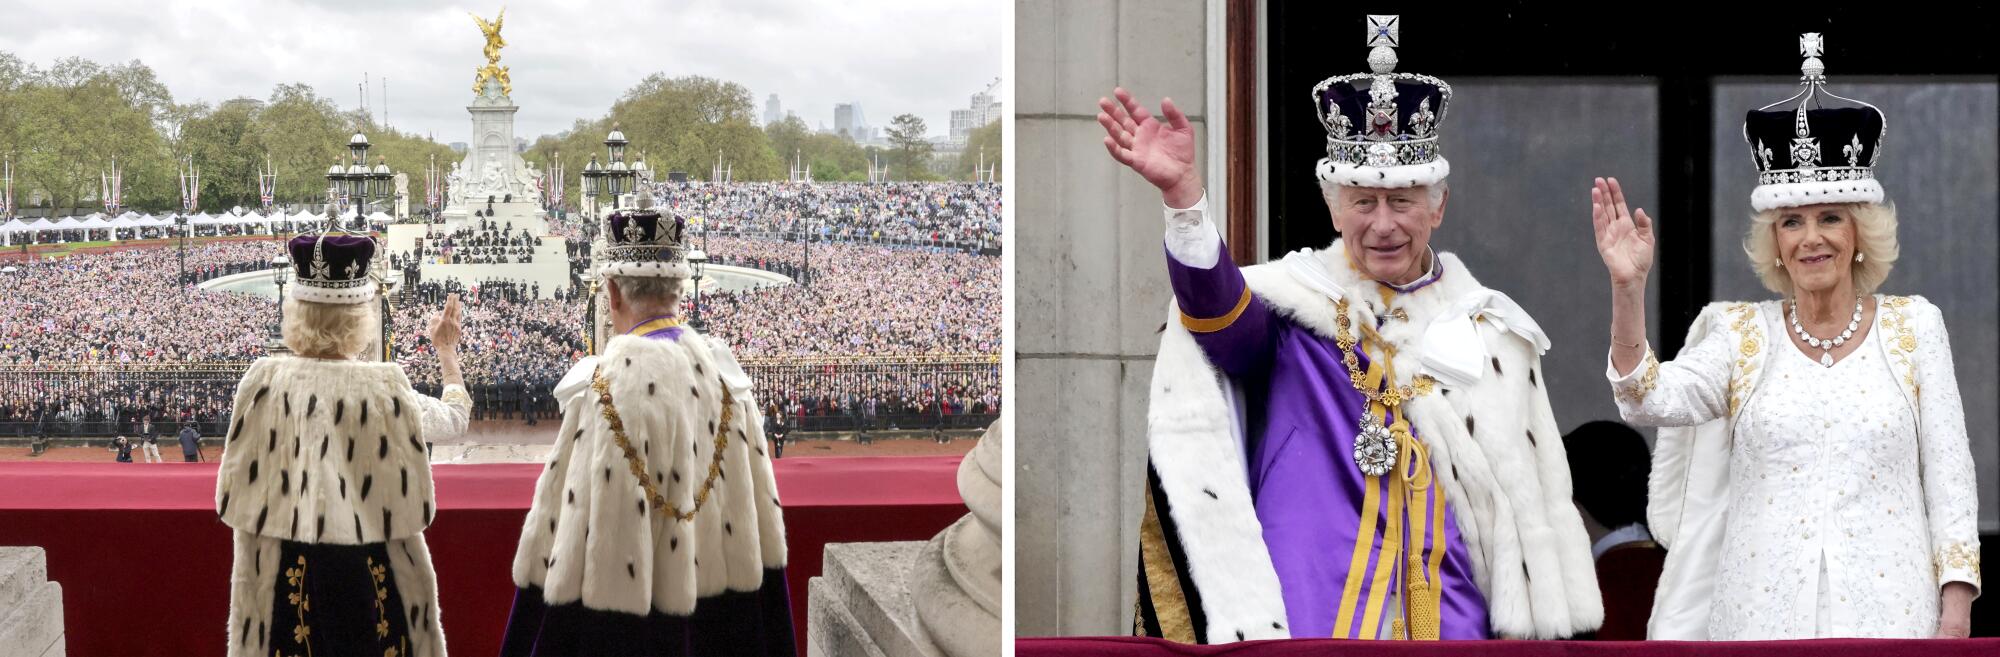 A diptych of Britain's King Charles III and Queen Camilla waving from a balcony at crowds below